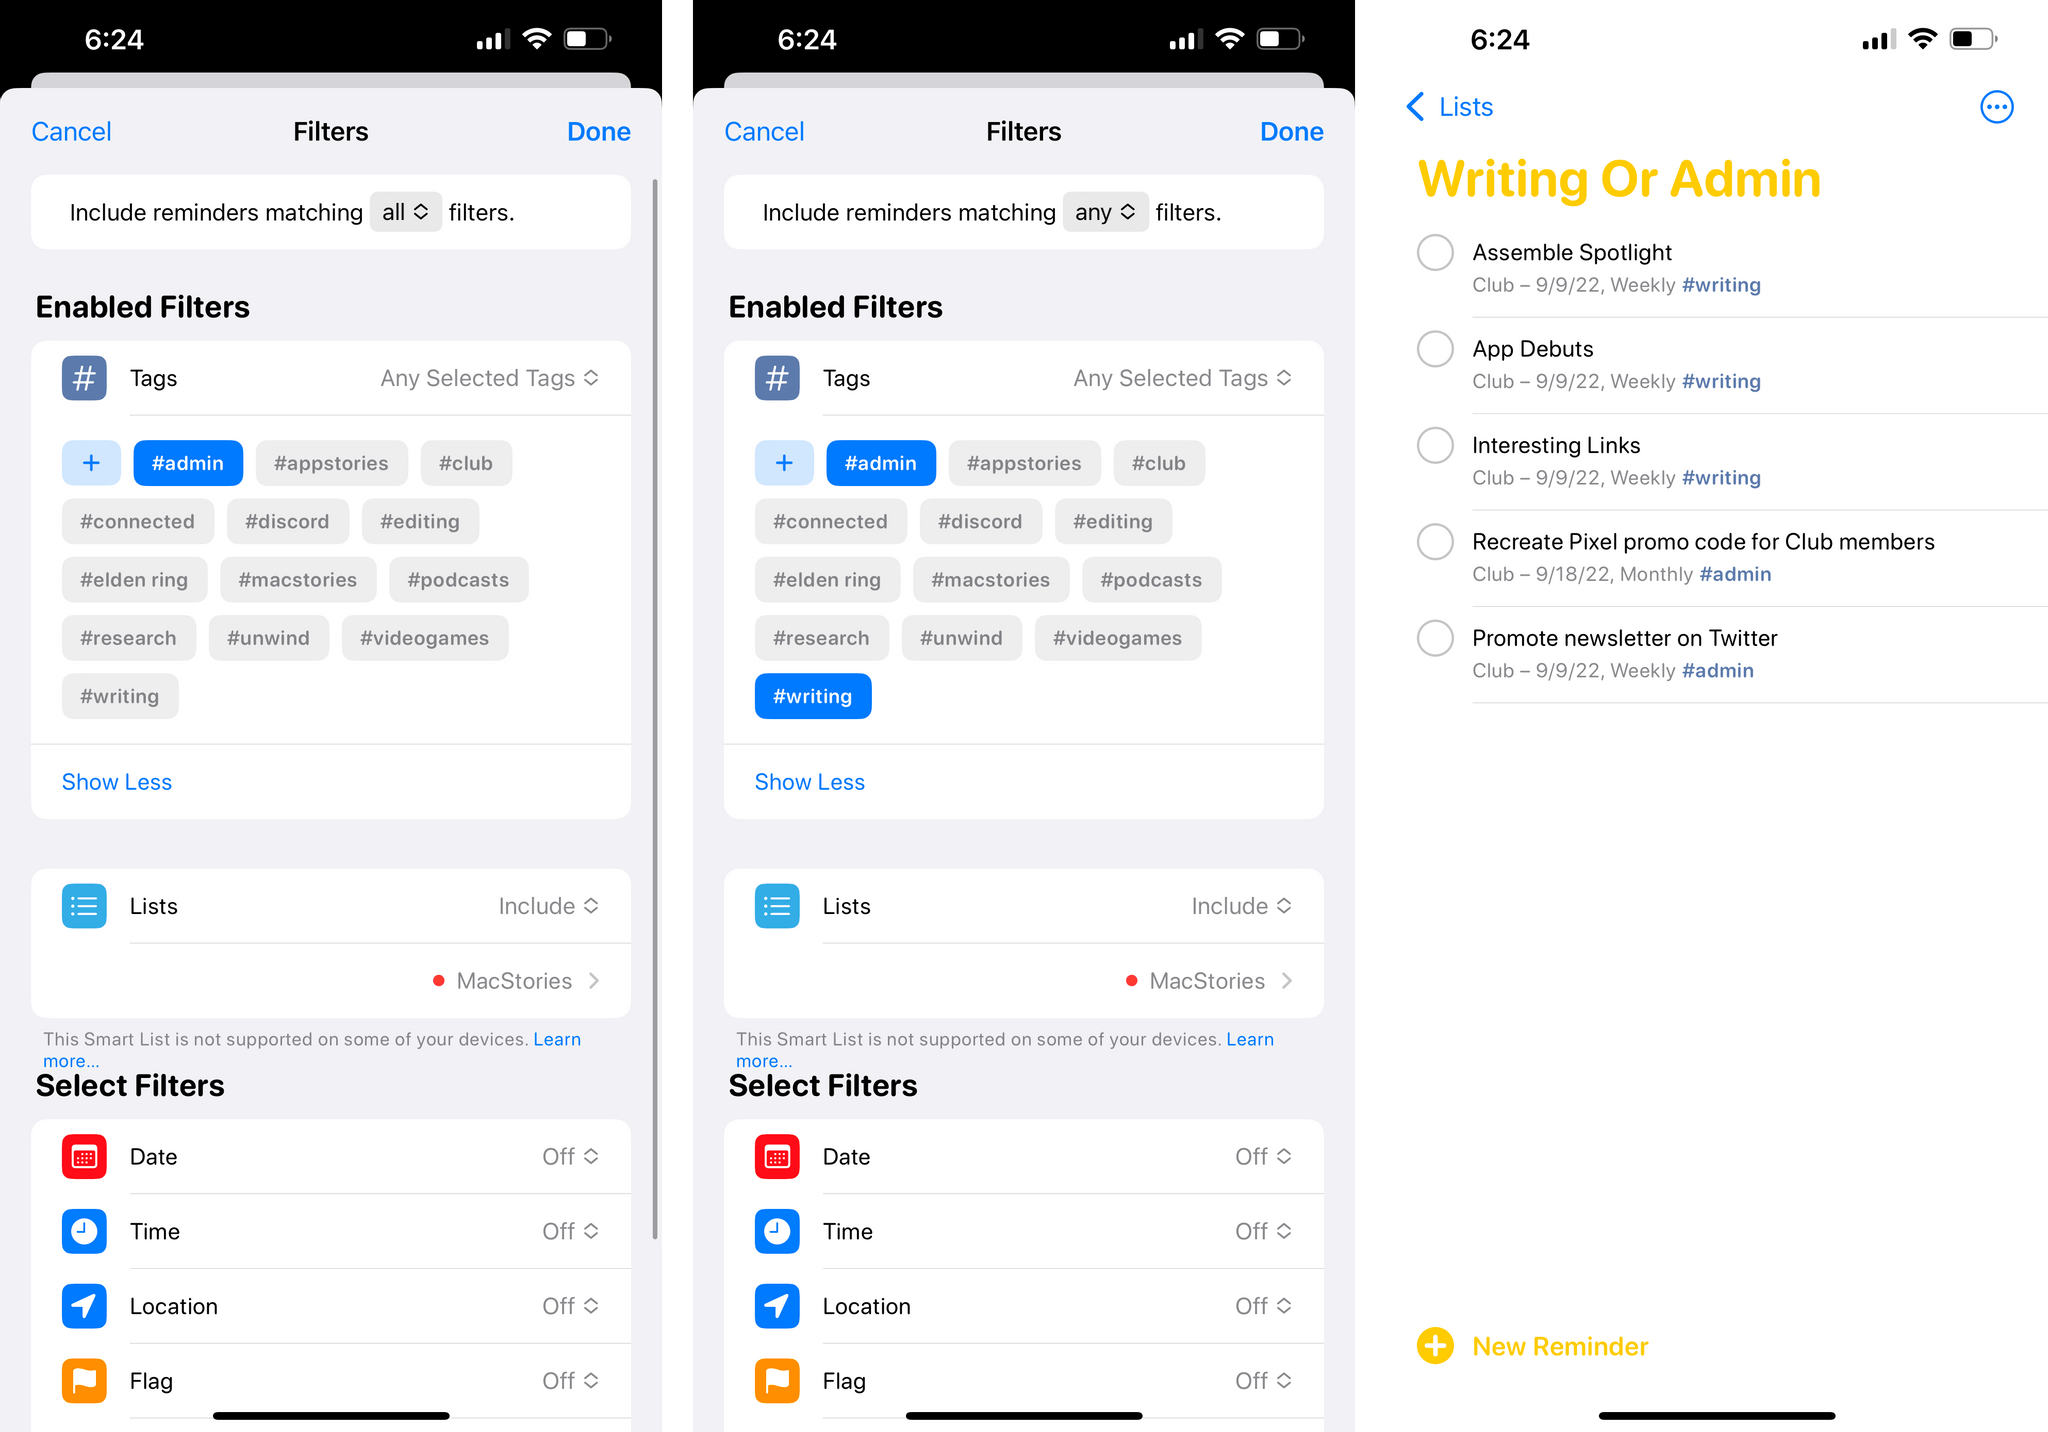 The new filters for smart lists in iOS 16's Reminders app.